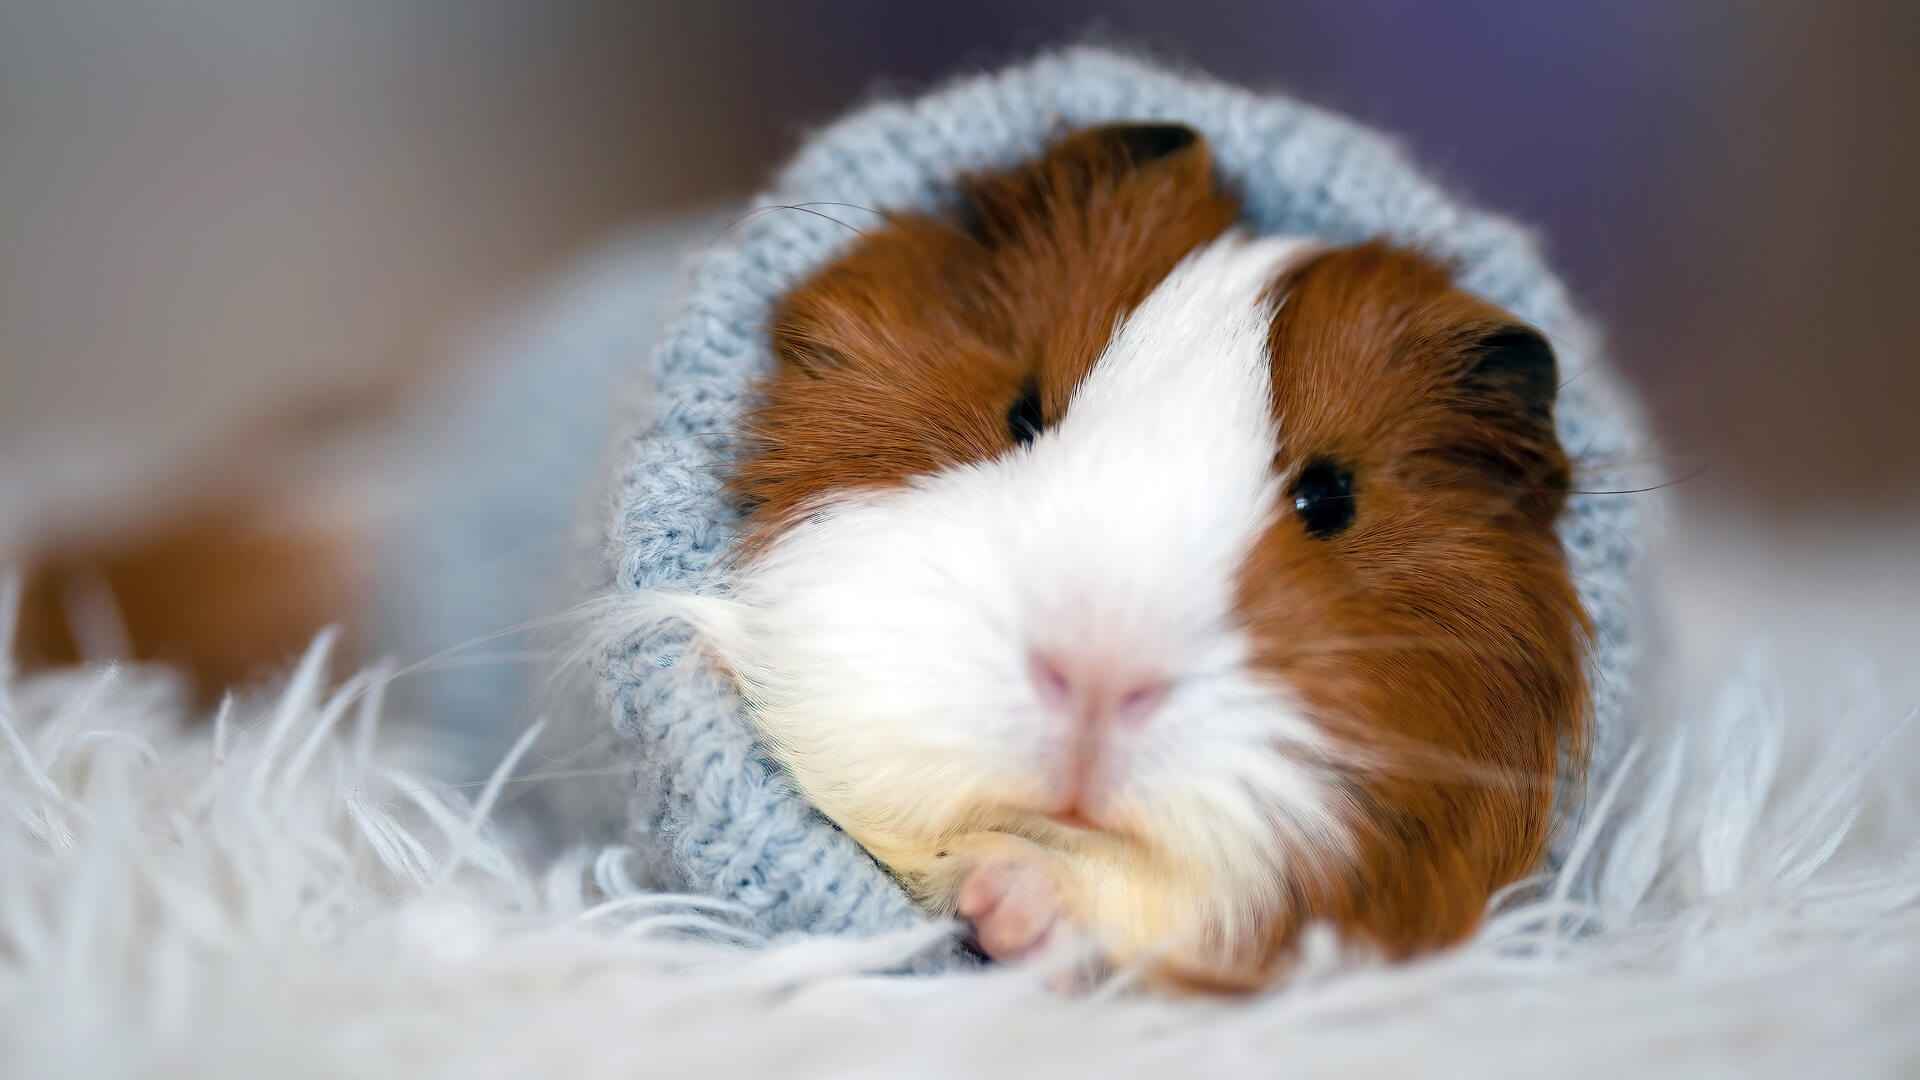 Can Guinea Pigs Have Blankets In Their Cage?